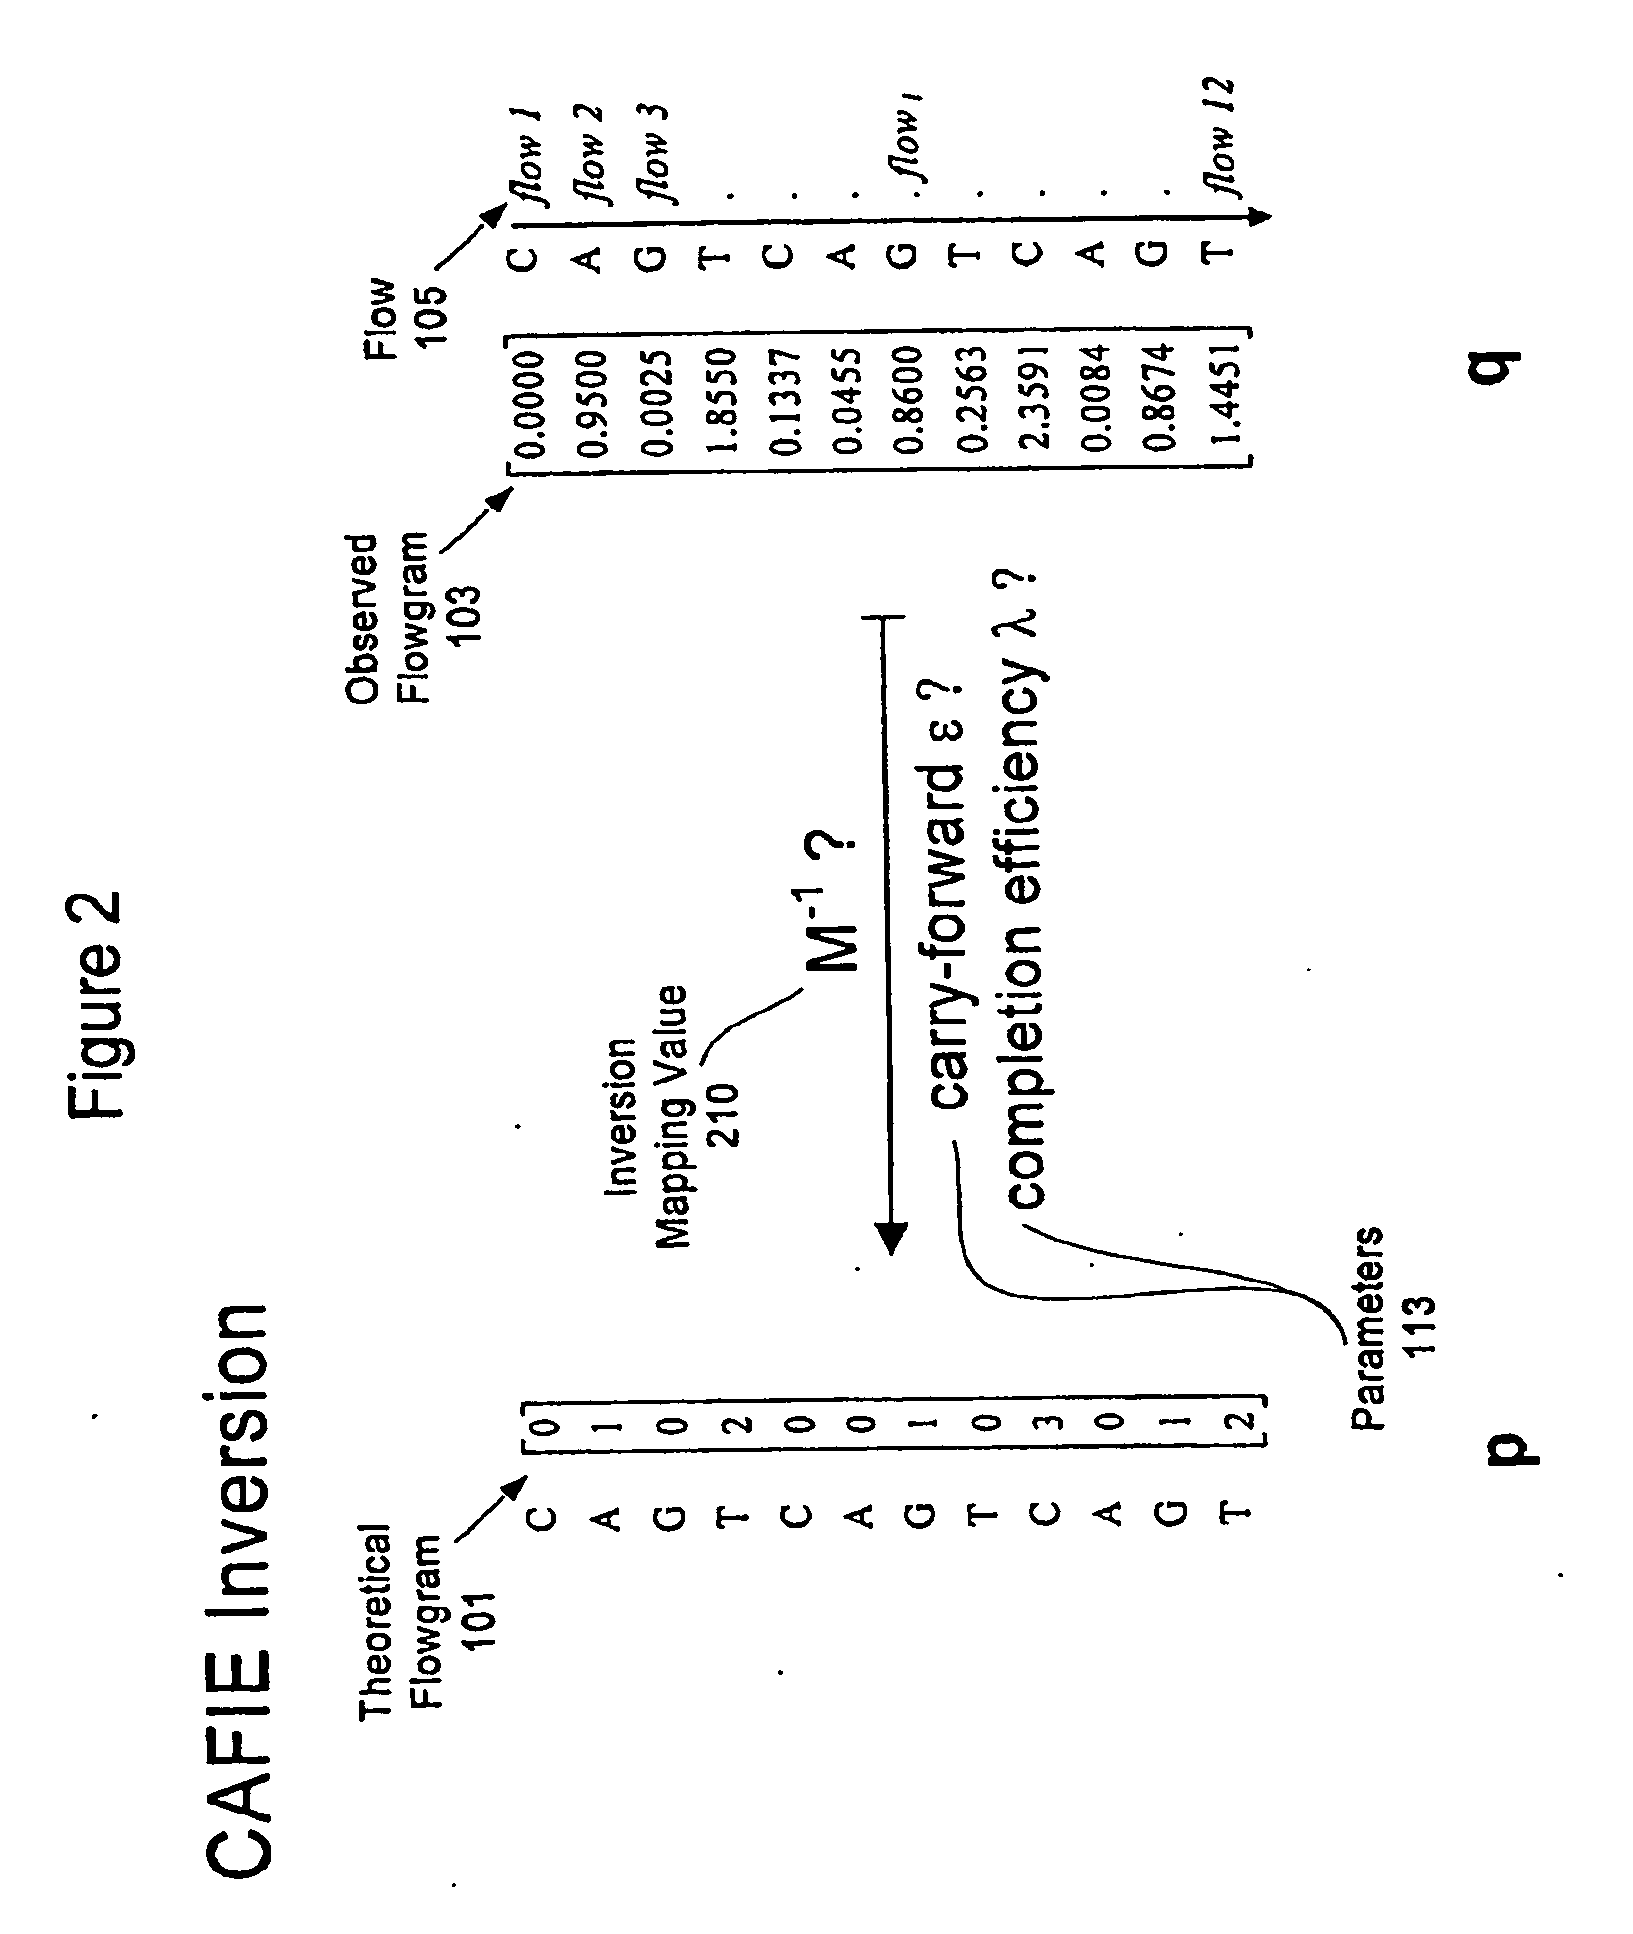 System and Method for Correcting Primer Extension Errors in Nucleic Acid Sequence Data